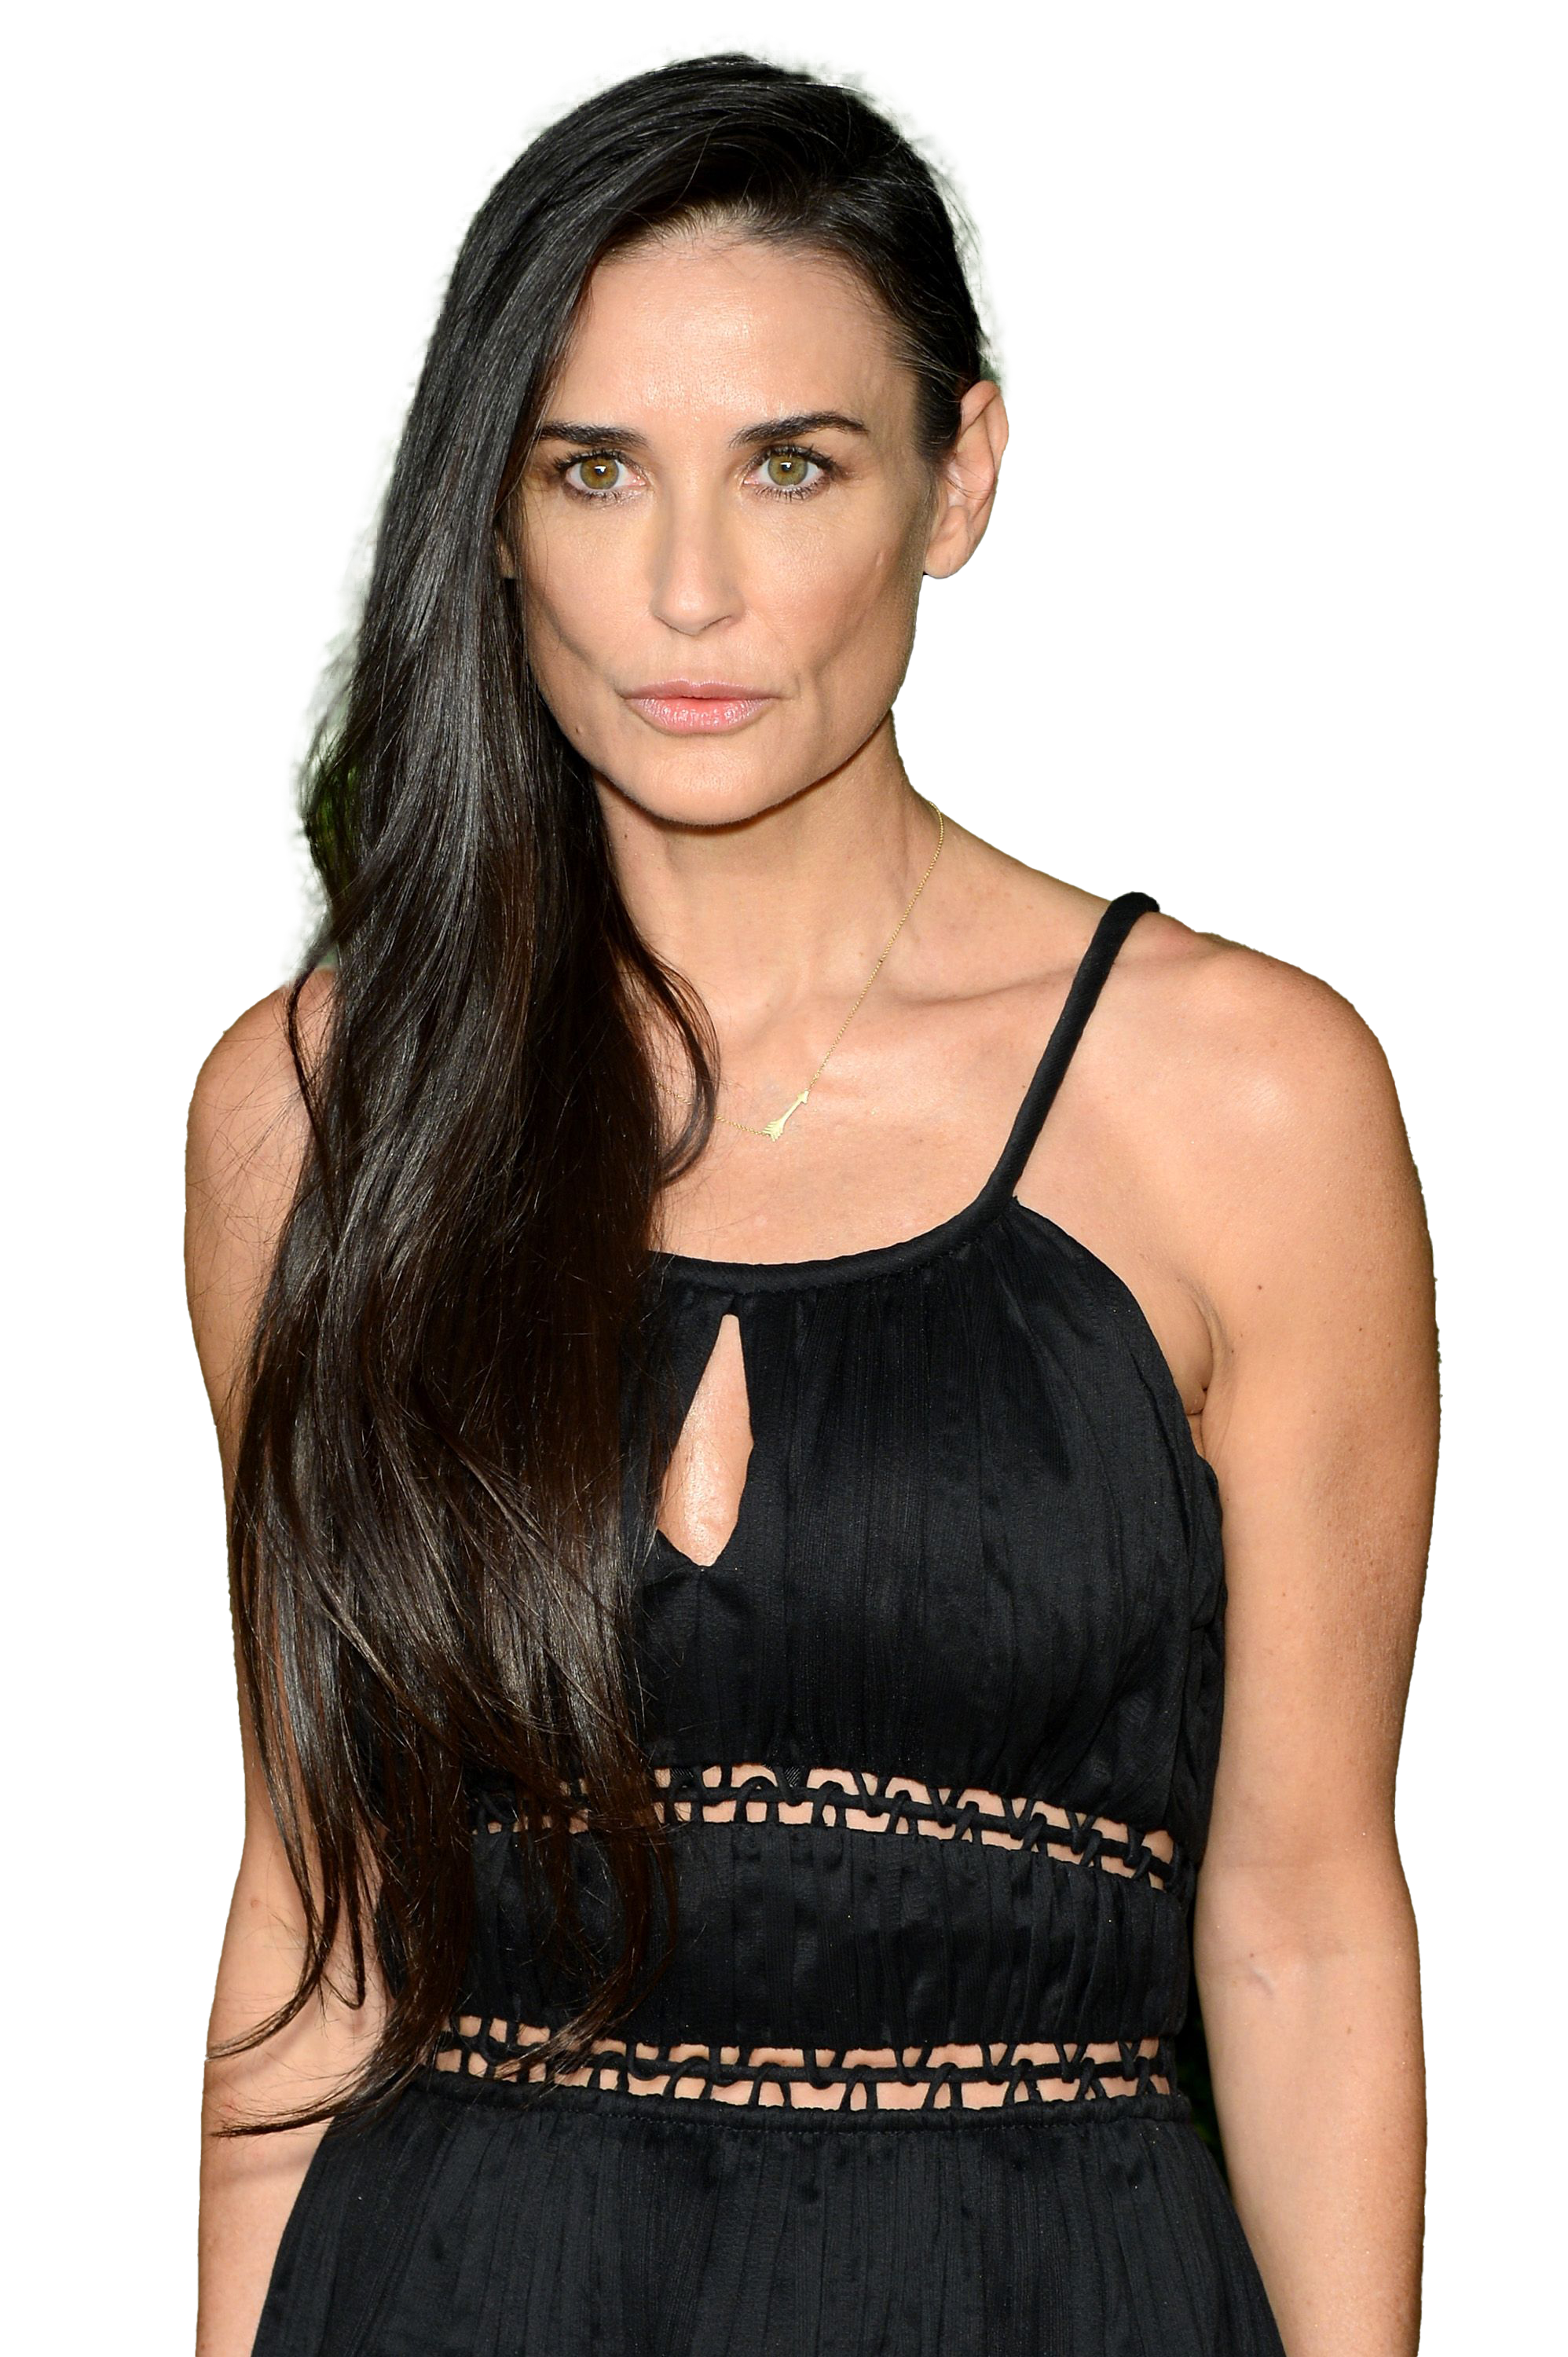 Demi Moore Download PNG Image